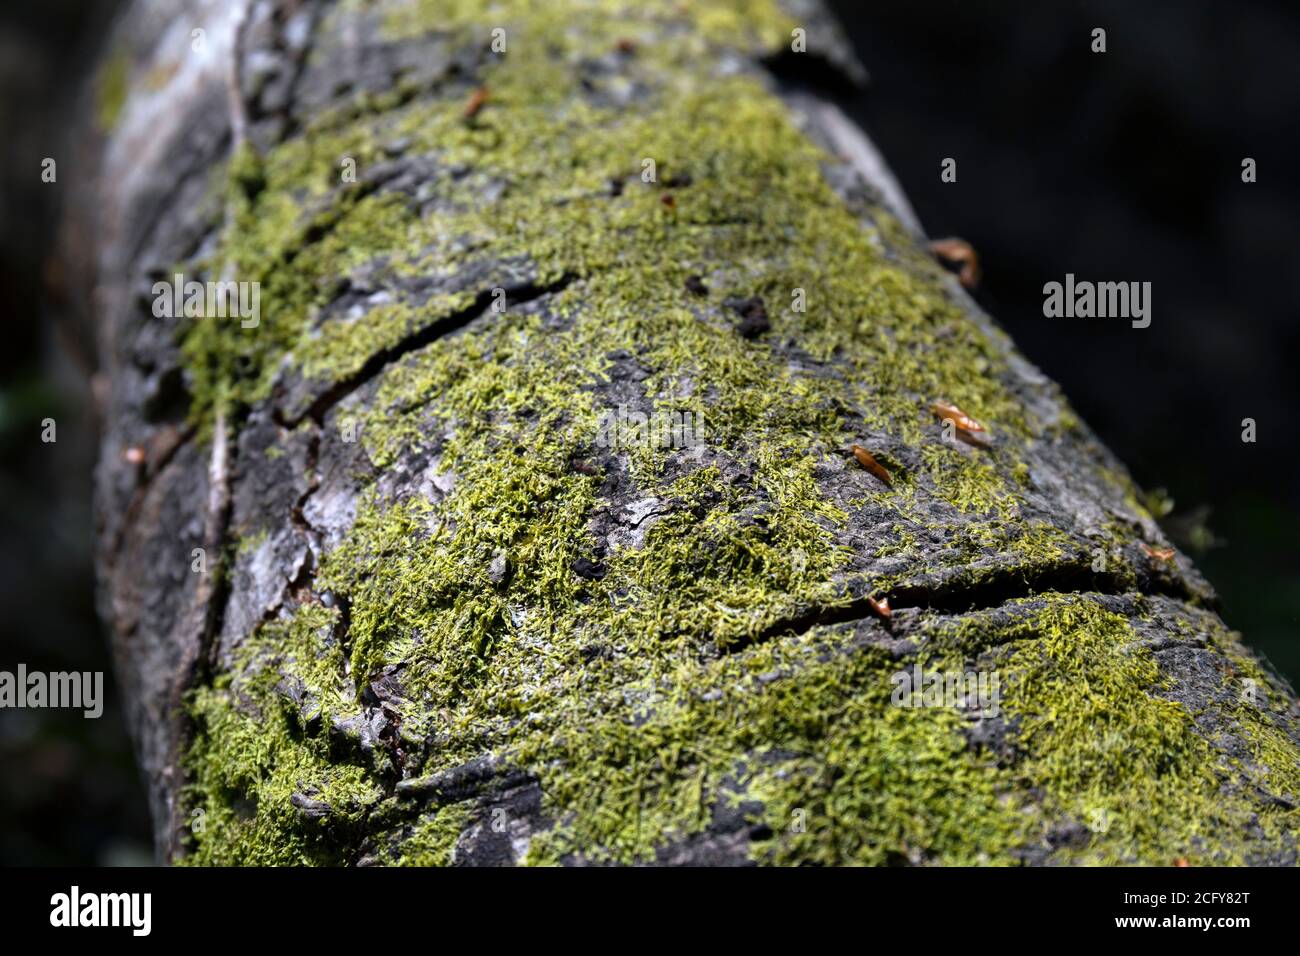 Europe, Luxembourg, Grevenmacher, Mullerthal Trail, Mosses and lichens growing on Tree Trunk Stock Photo